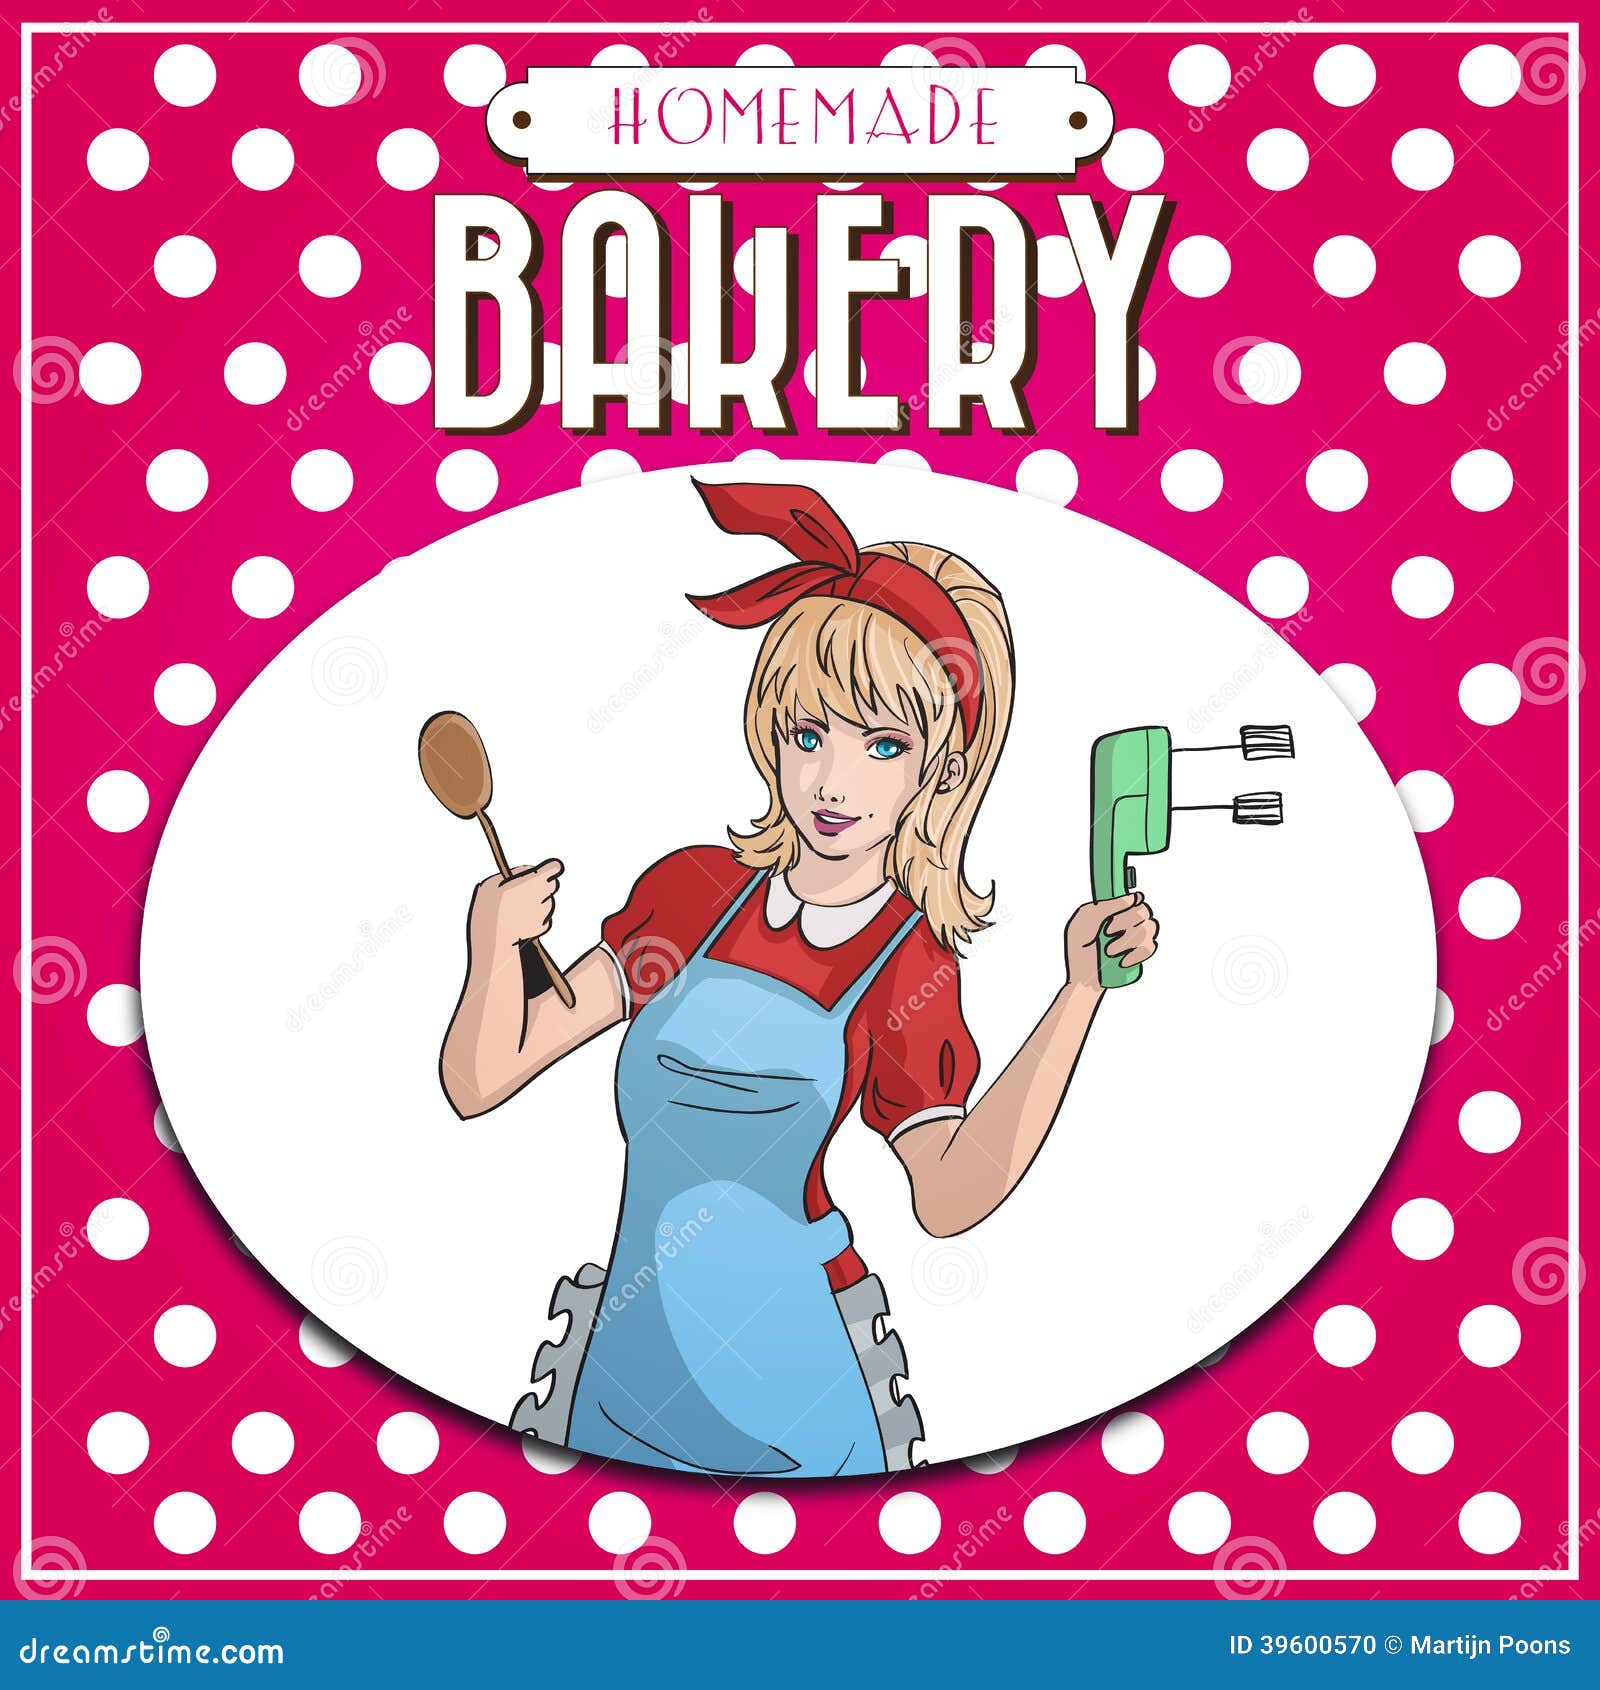 Vintage bakery poster stock vector. Illustration of housewife - 39600570